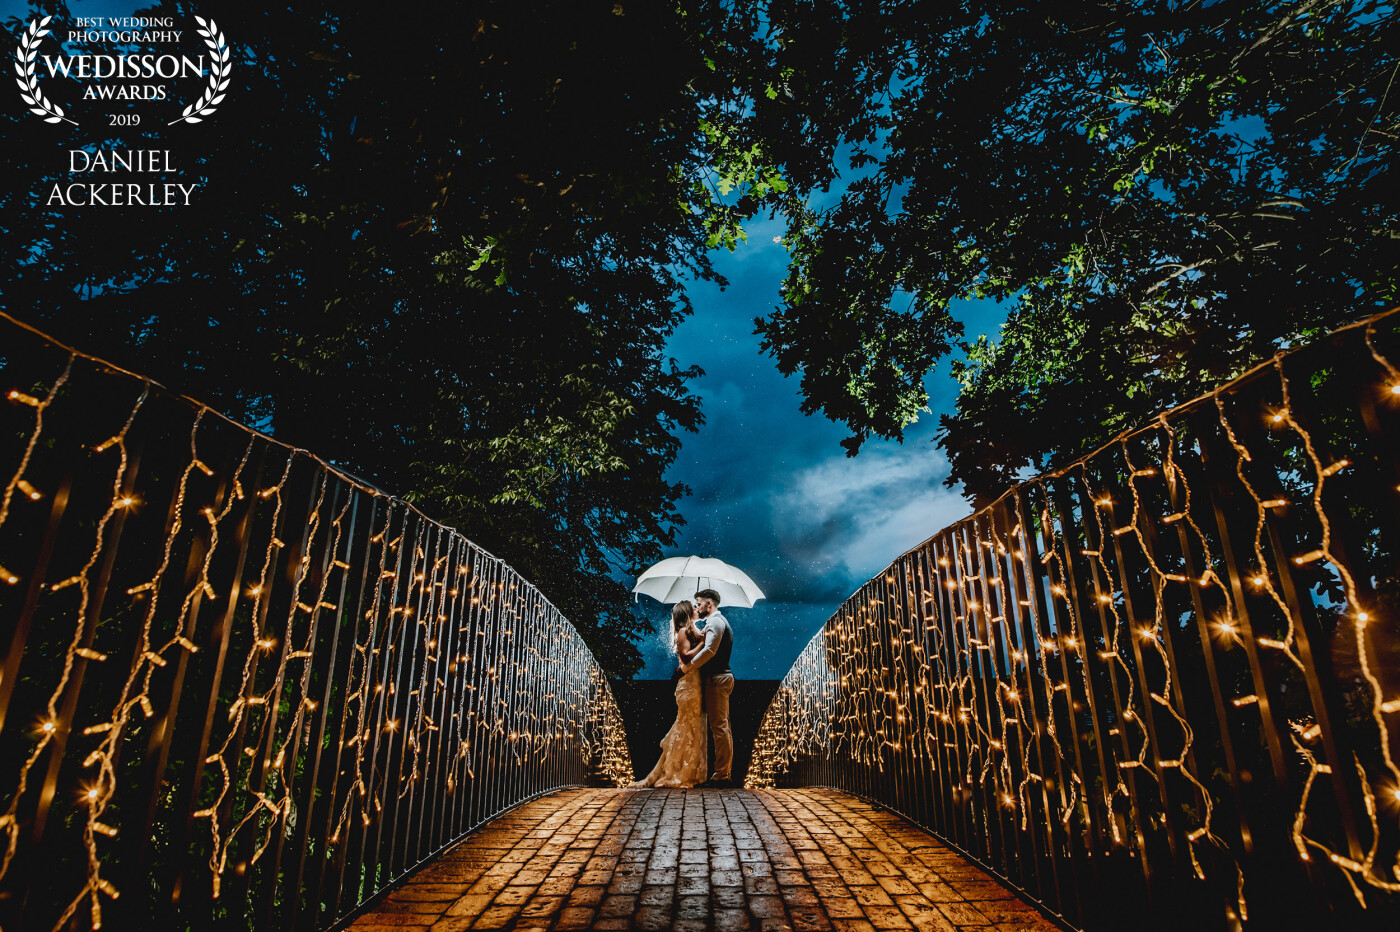 It had rained all day long at the venue, but towards the end of the night it became just drizzle, so we nipped out and used the beautiful bridge lights as a lovely setting for this portrait.